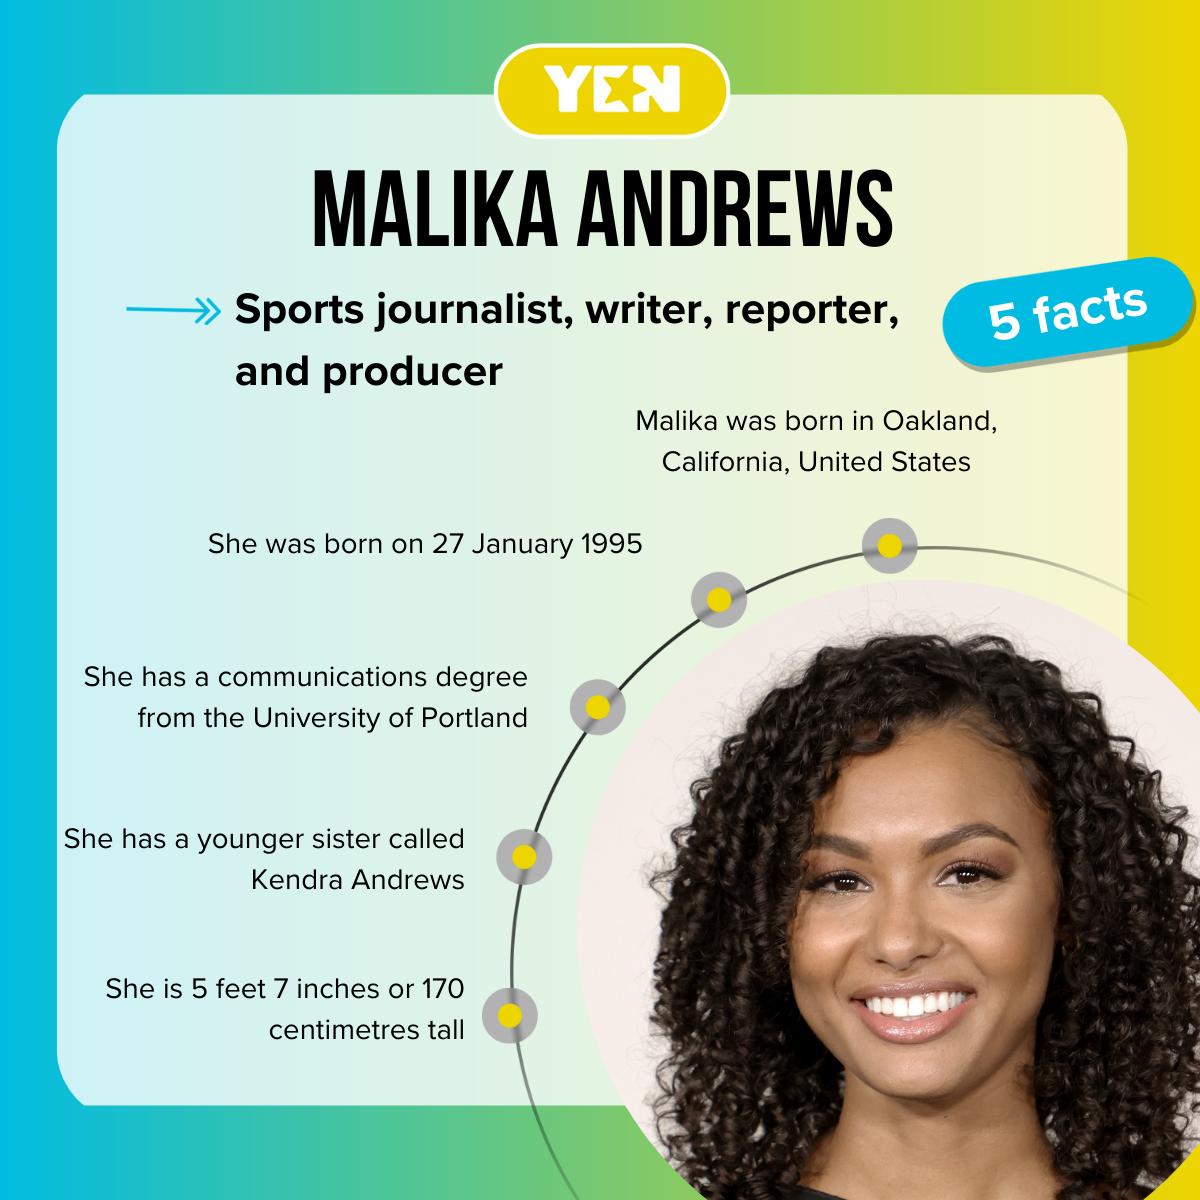 Facts about Malika Andrews